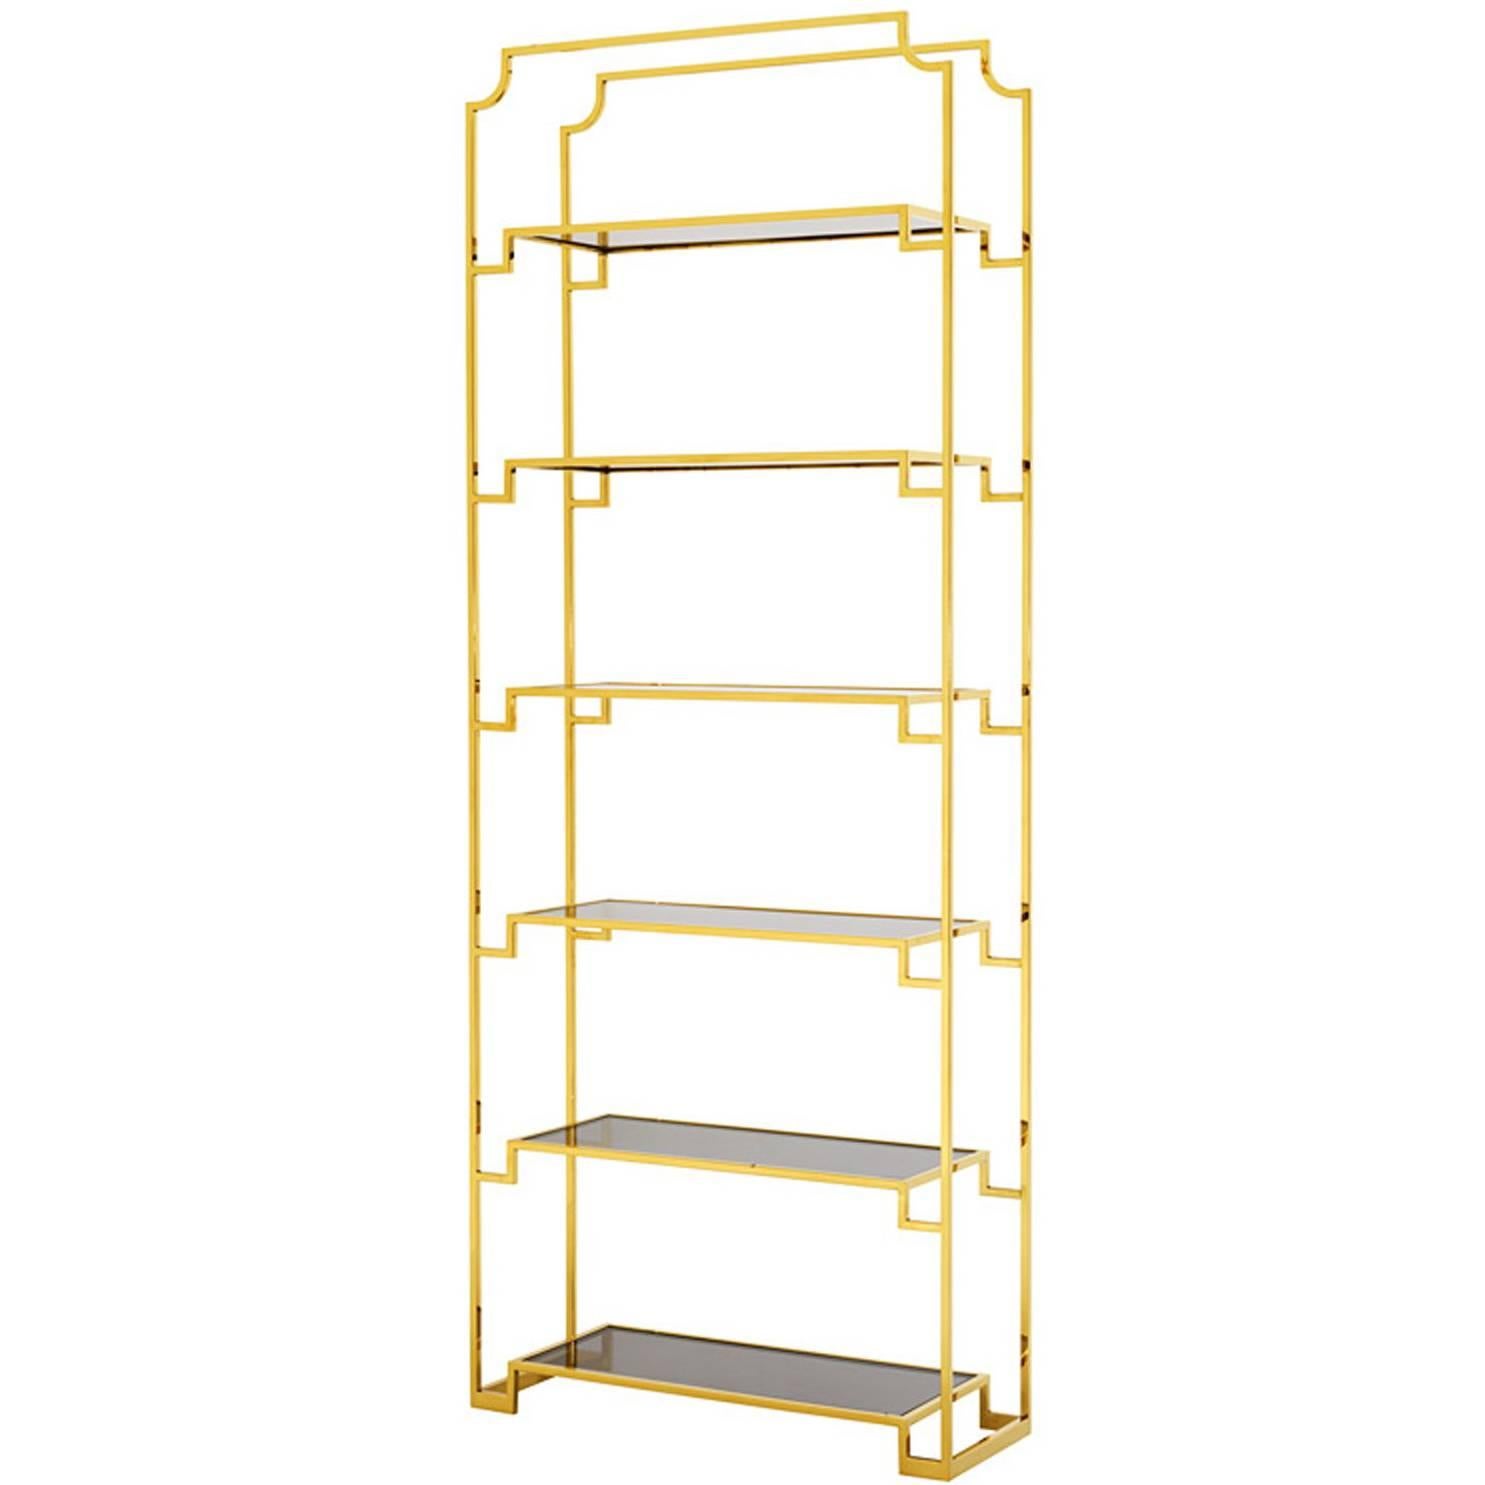 Stantord Bookshelves in Gold Finish with Smoked Glass